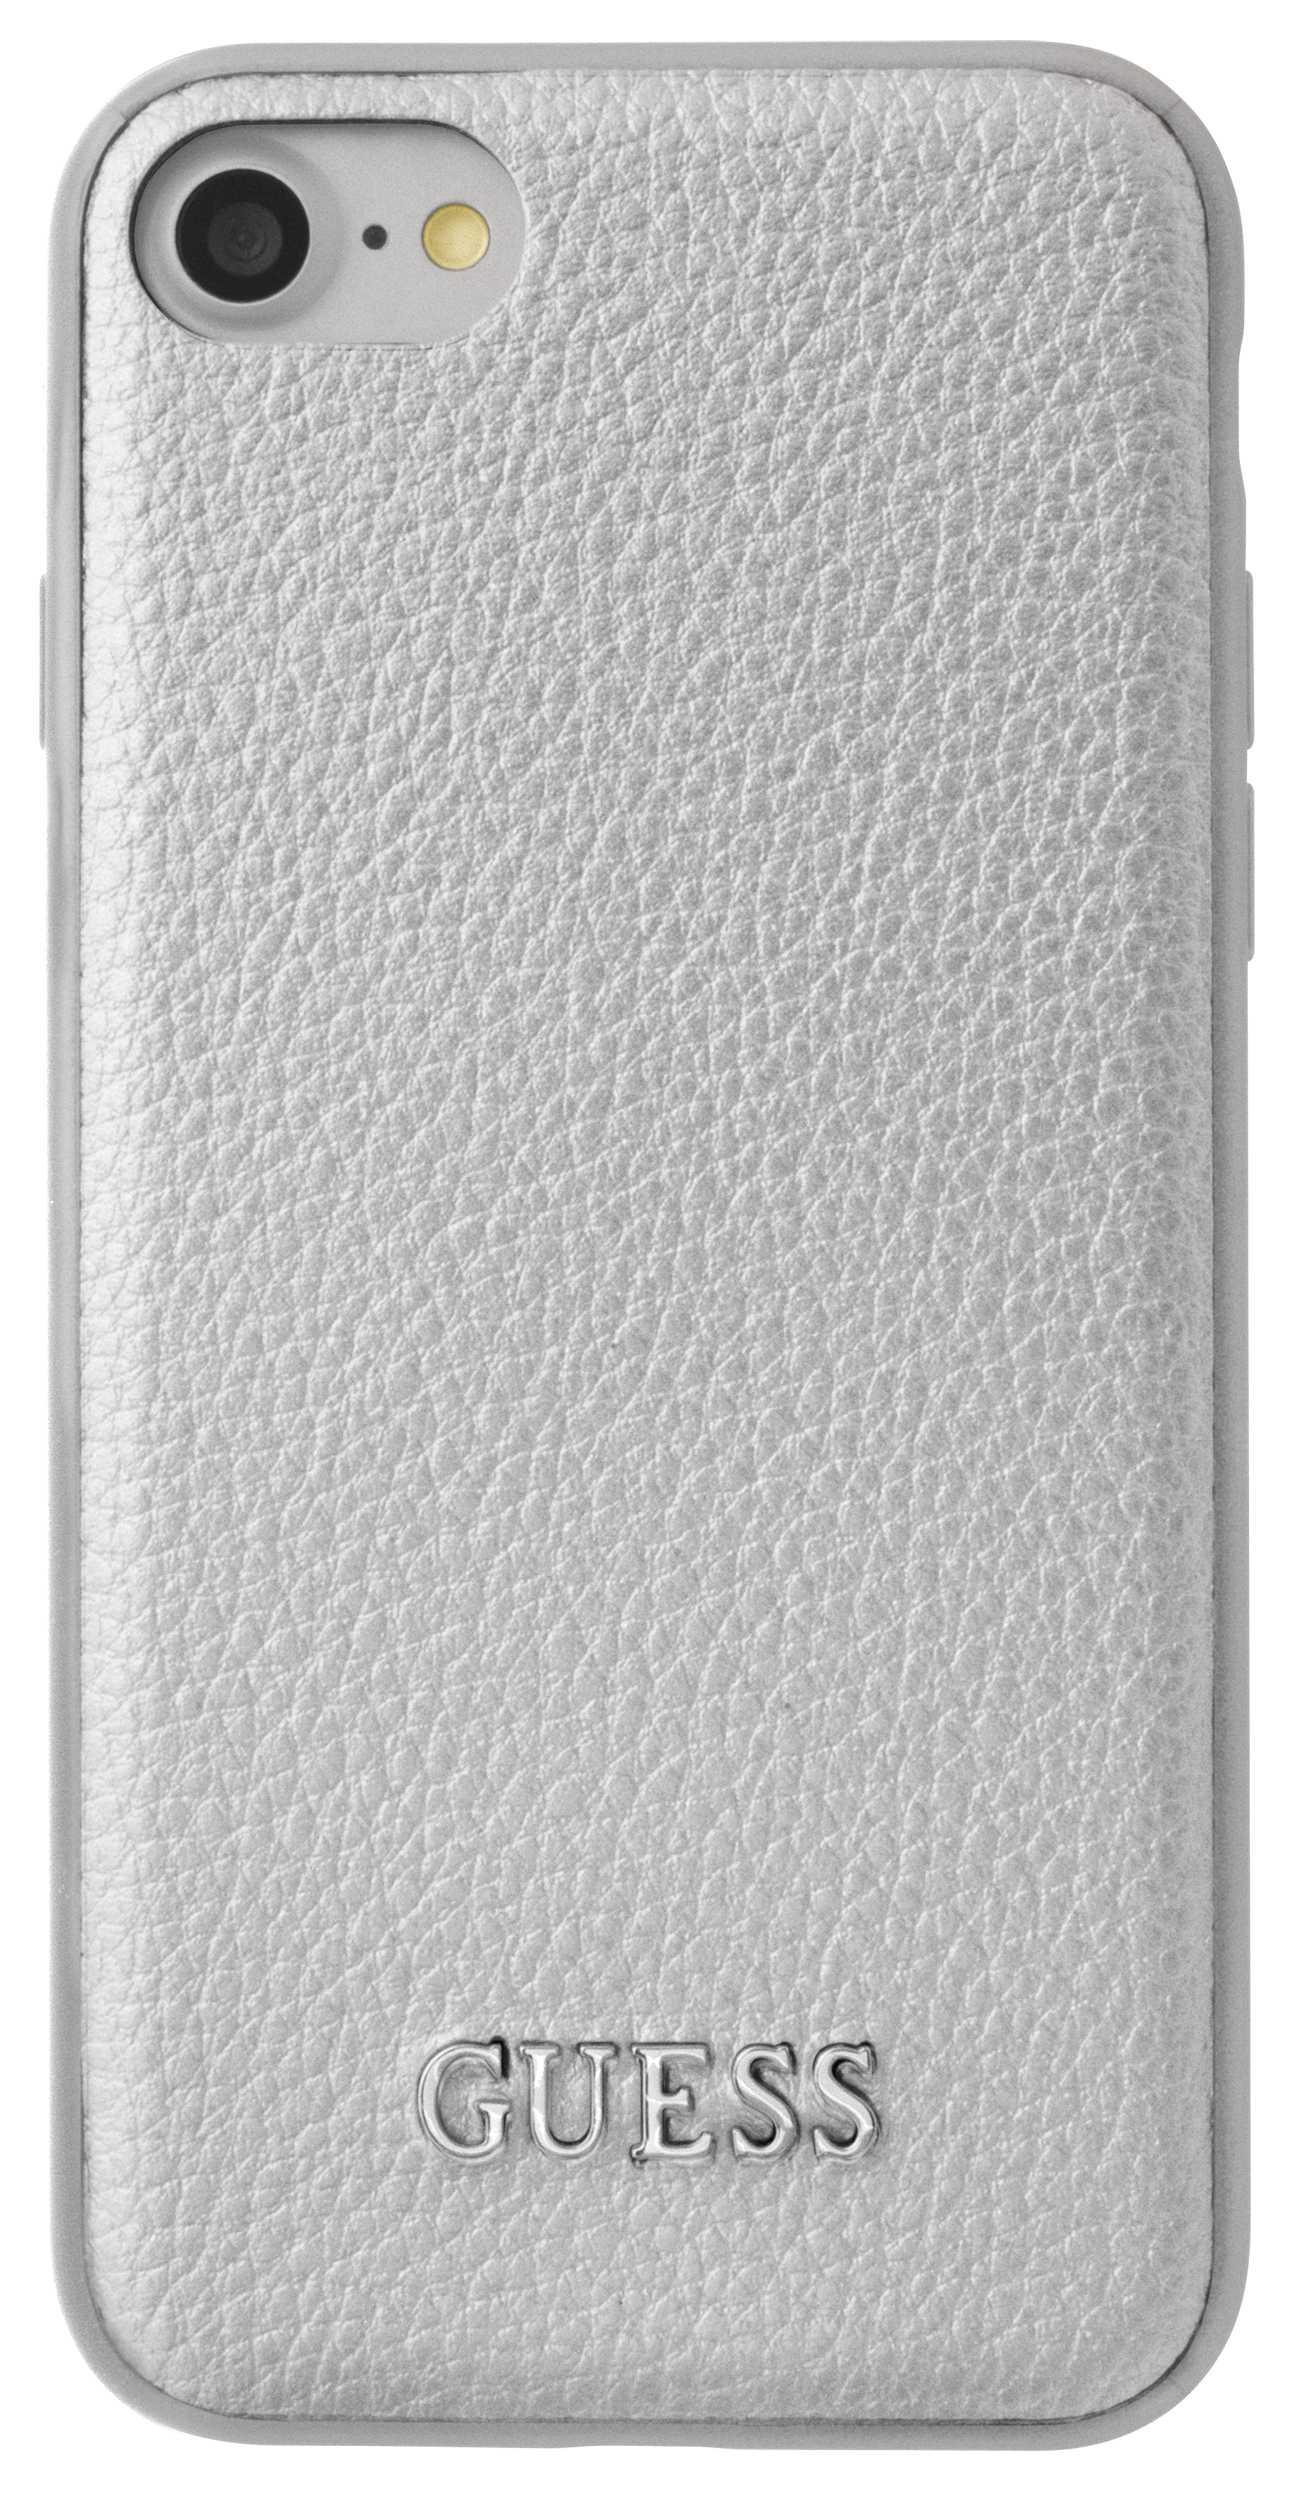 Guess Iridescent Hard Case for iPhone 7 - Silver